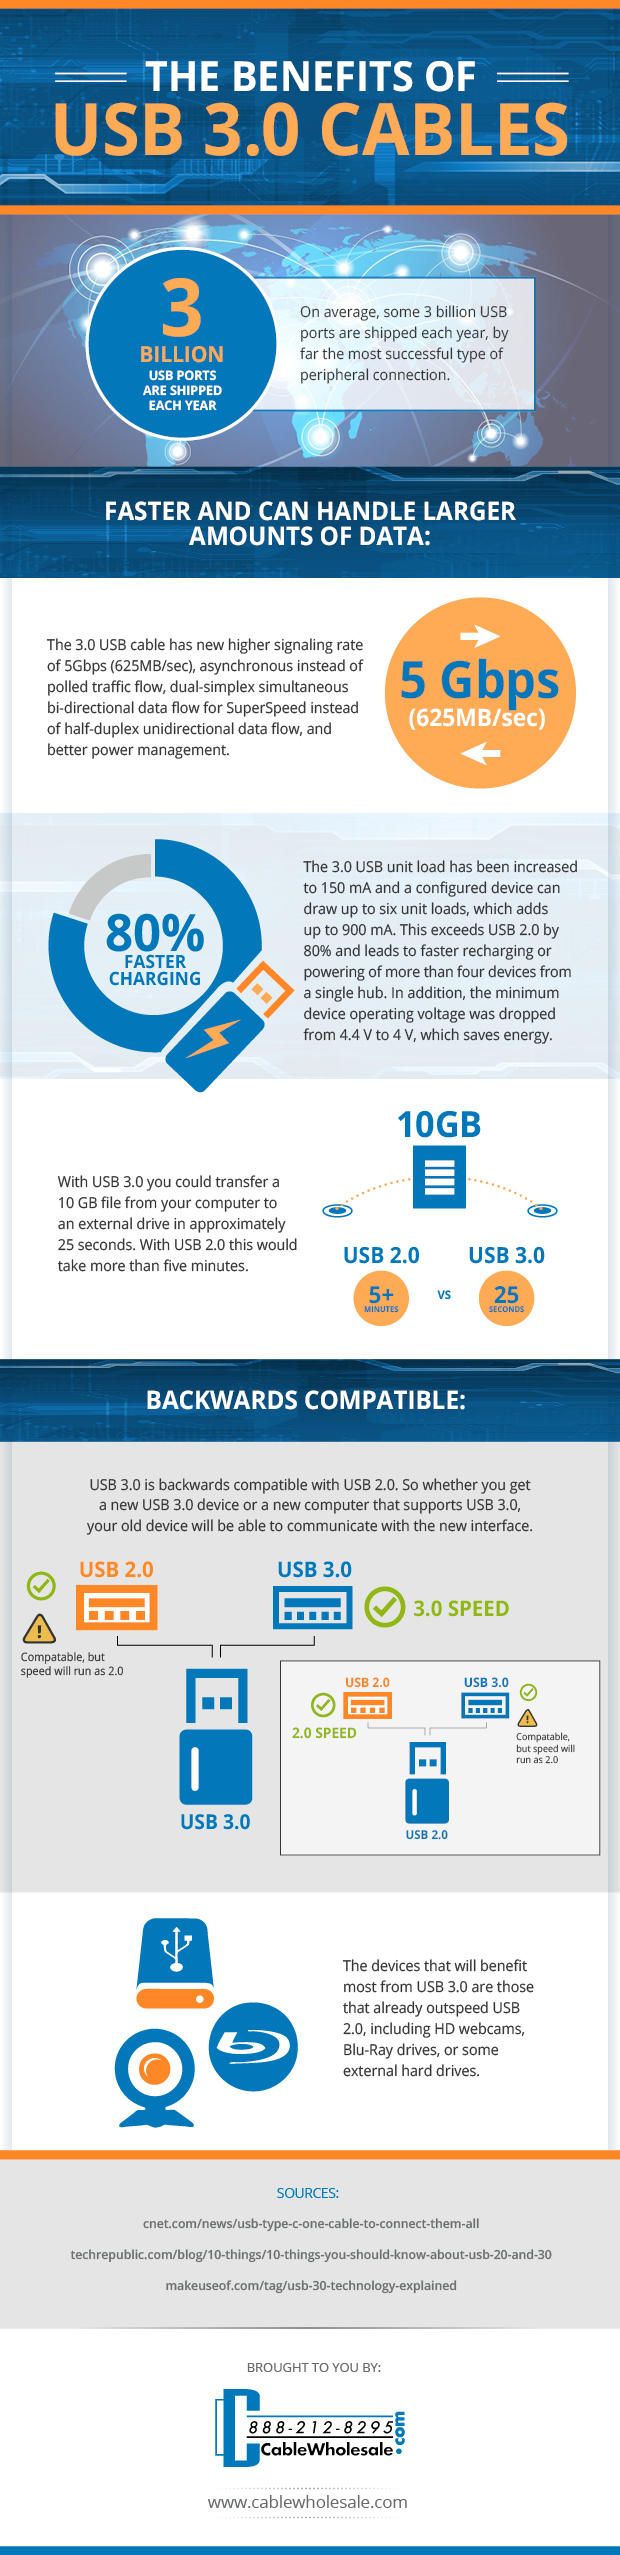 The Benefits of USB 3.0 Cables